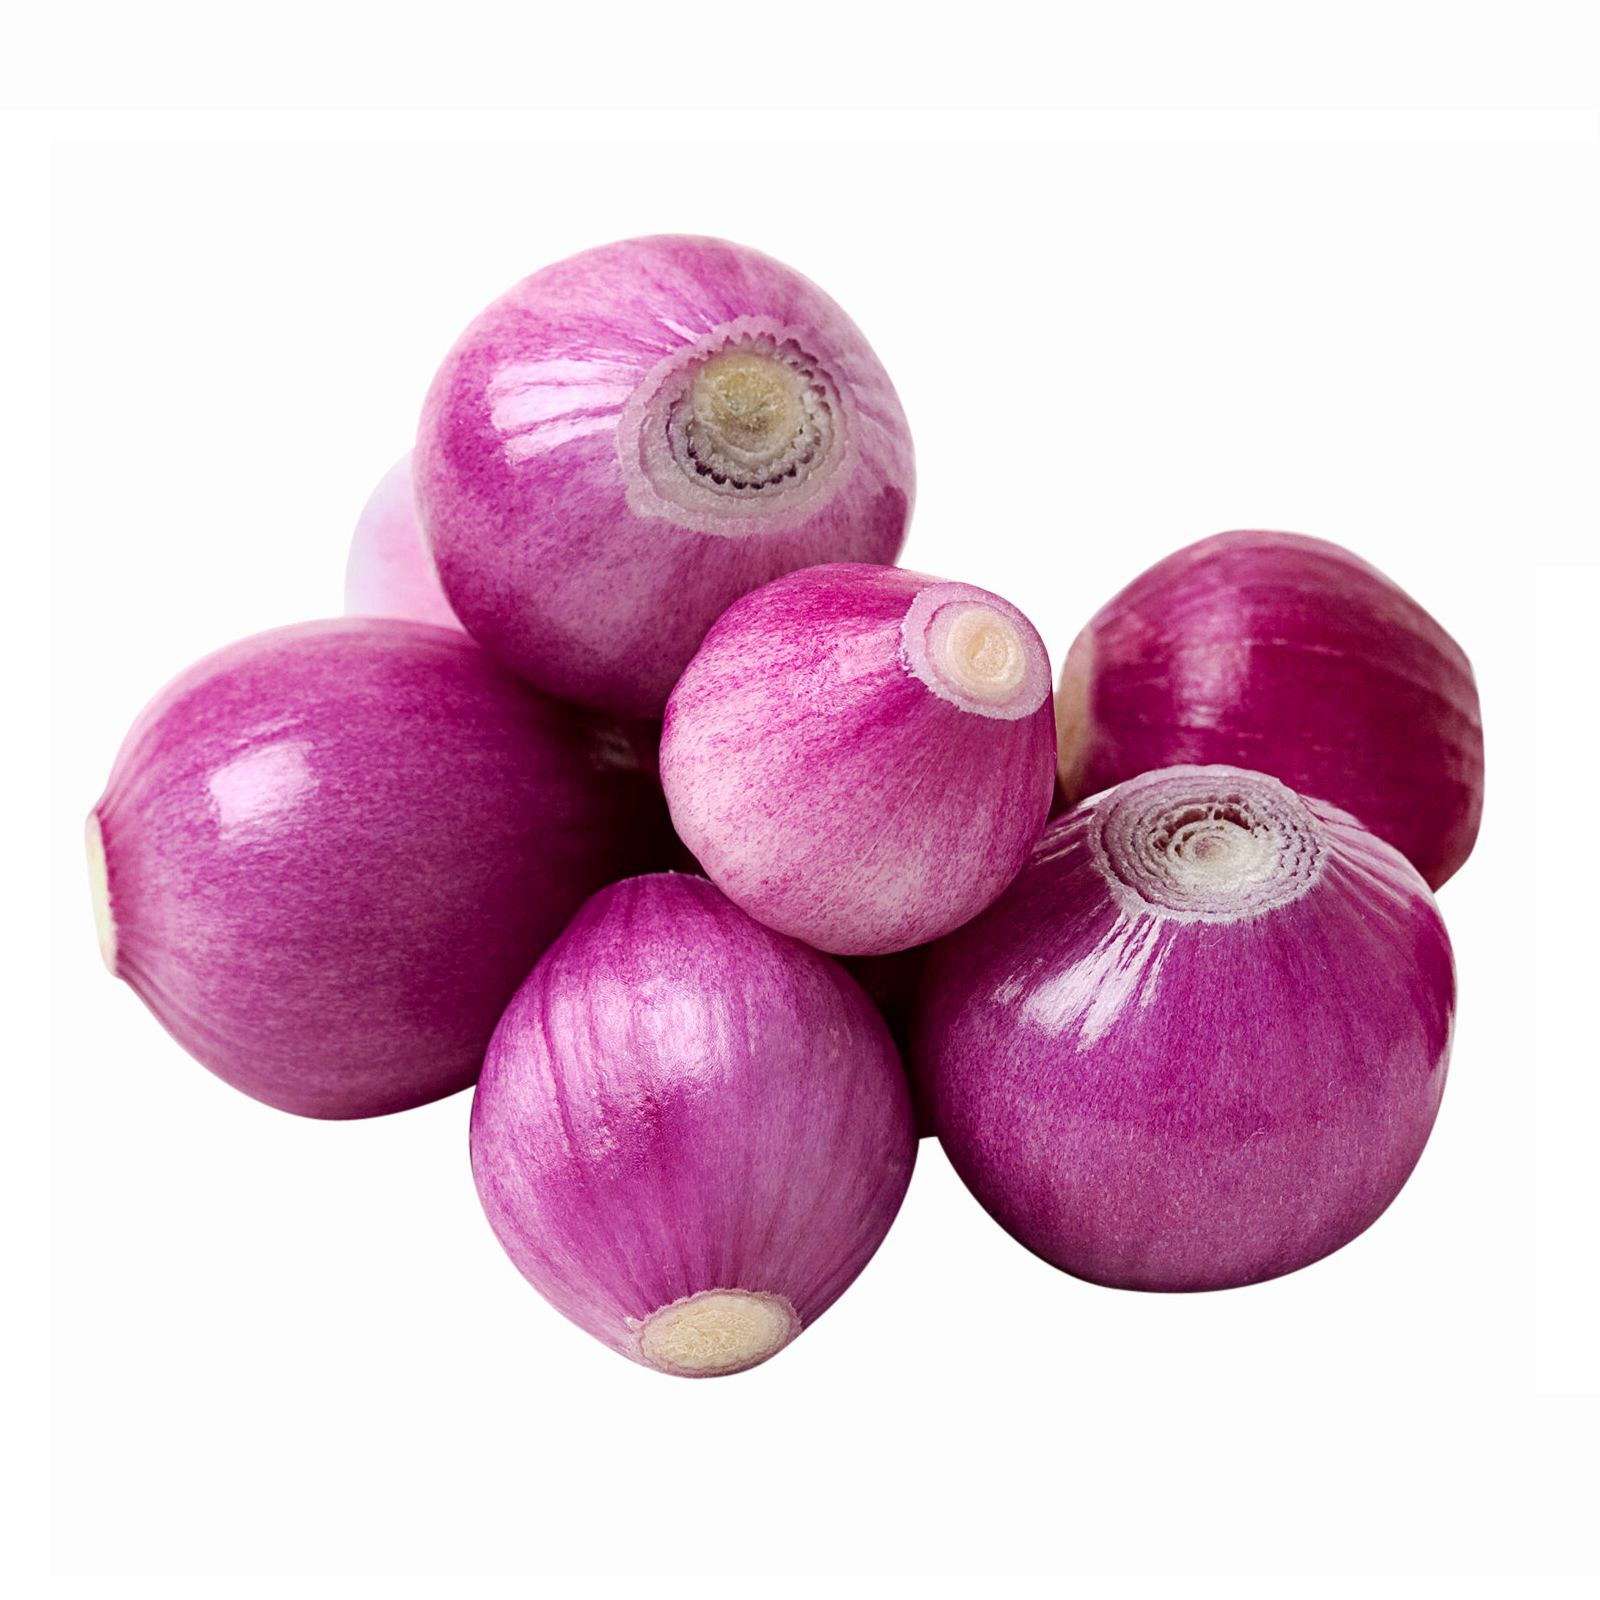 8 Tasty Substitutes for Shallots